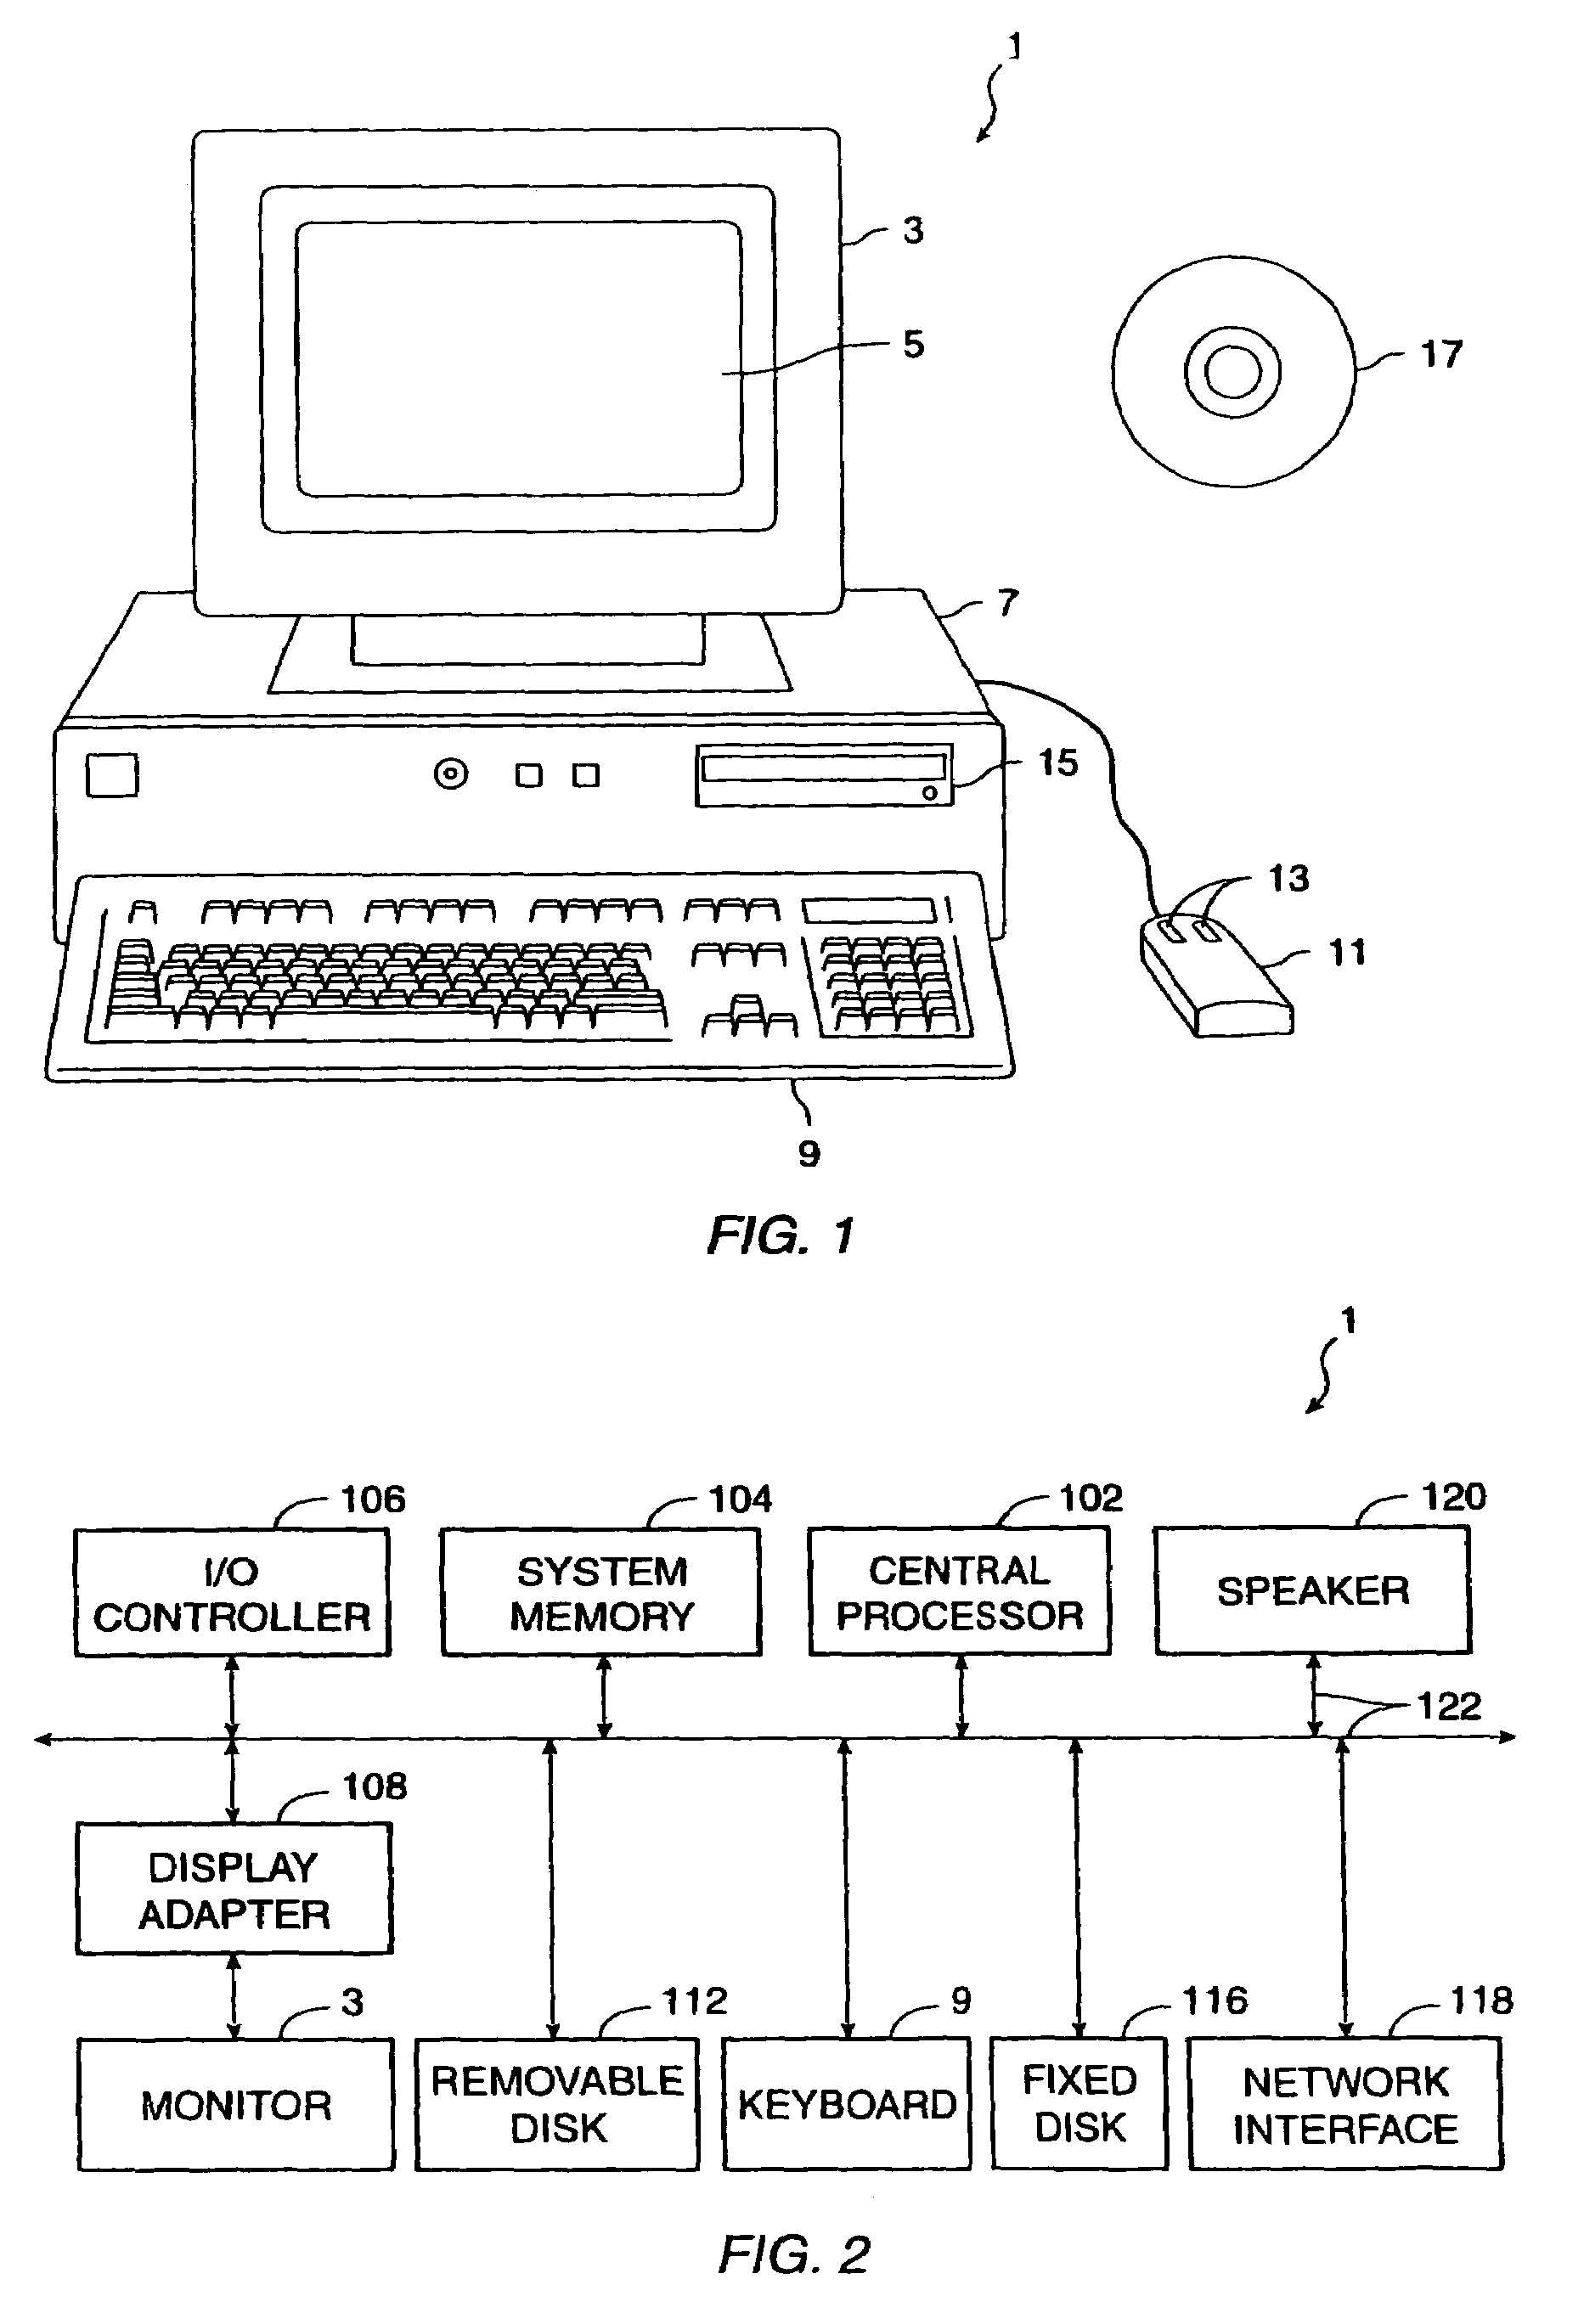 Load test system and method